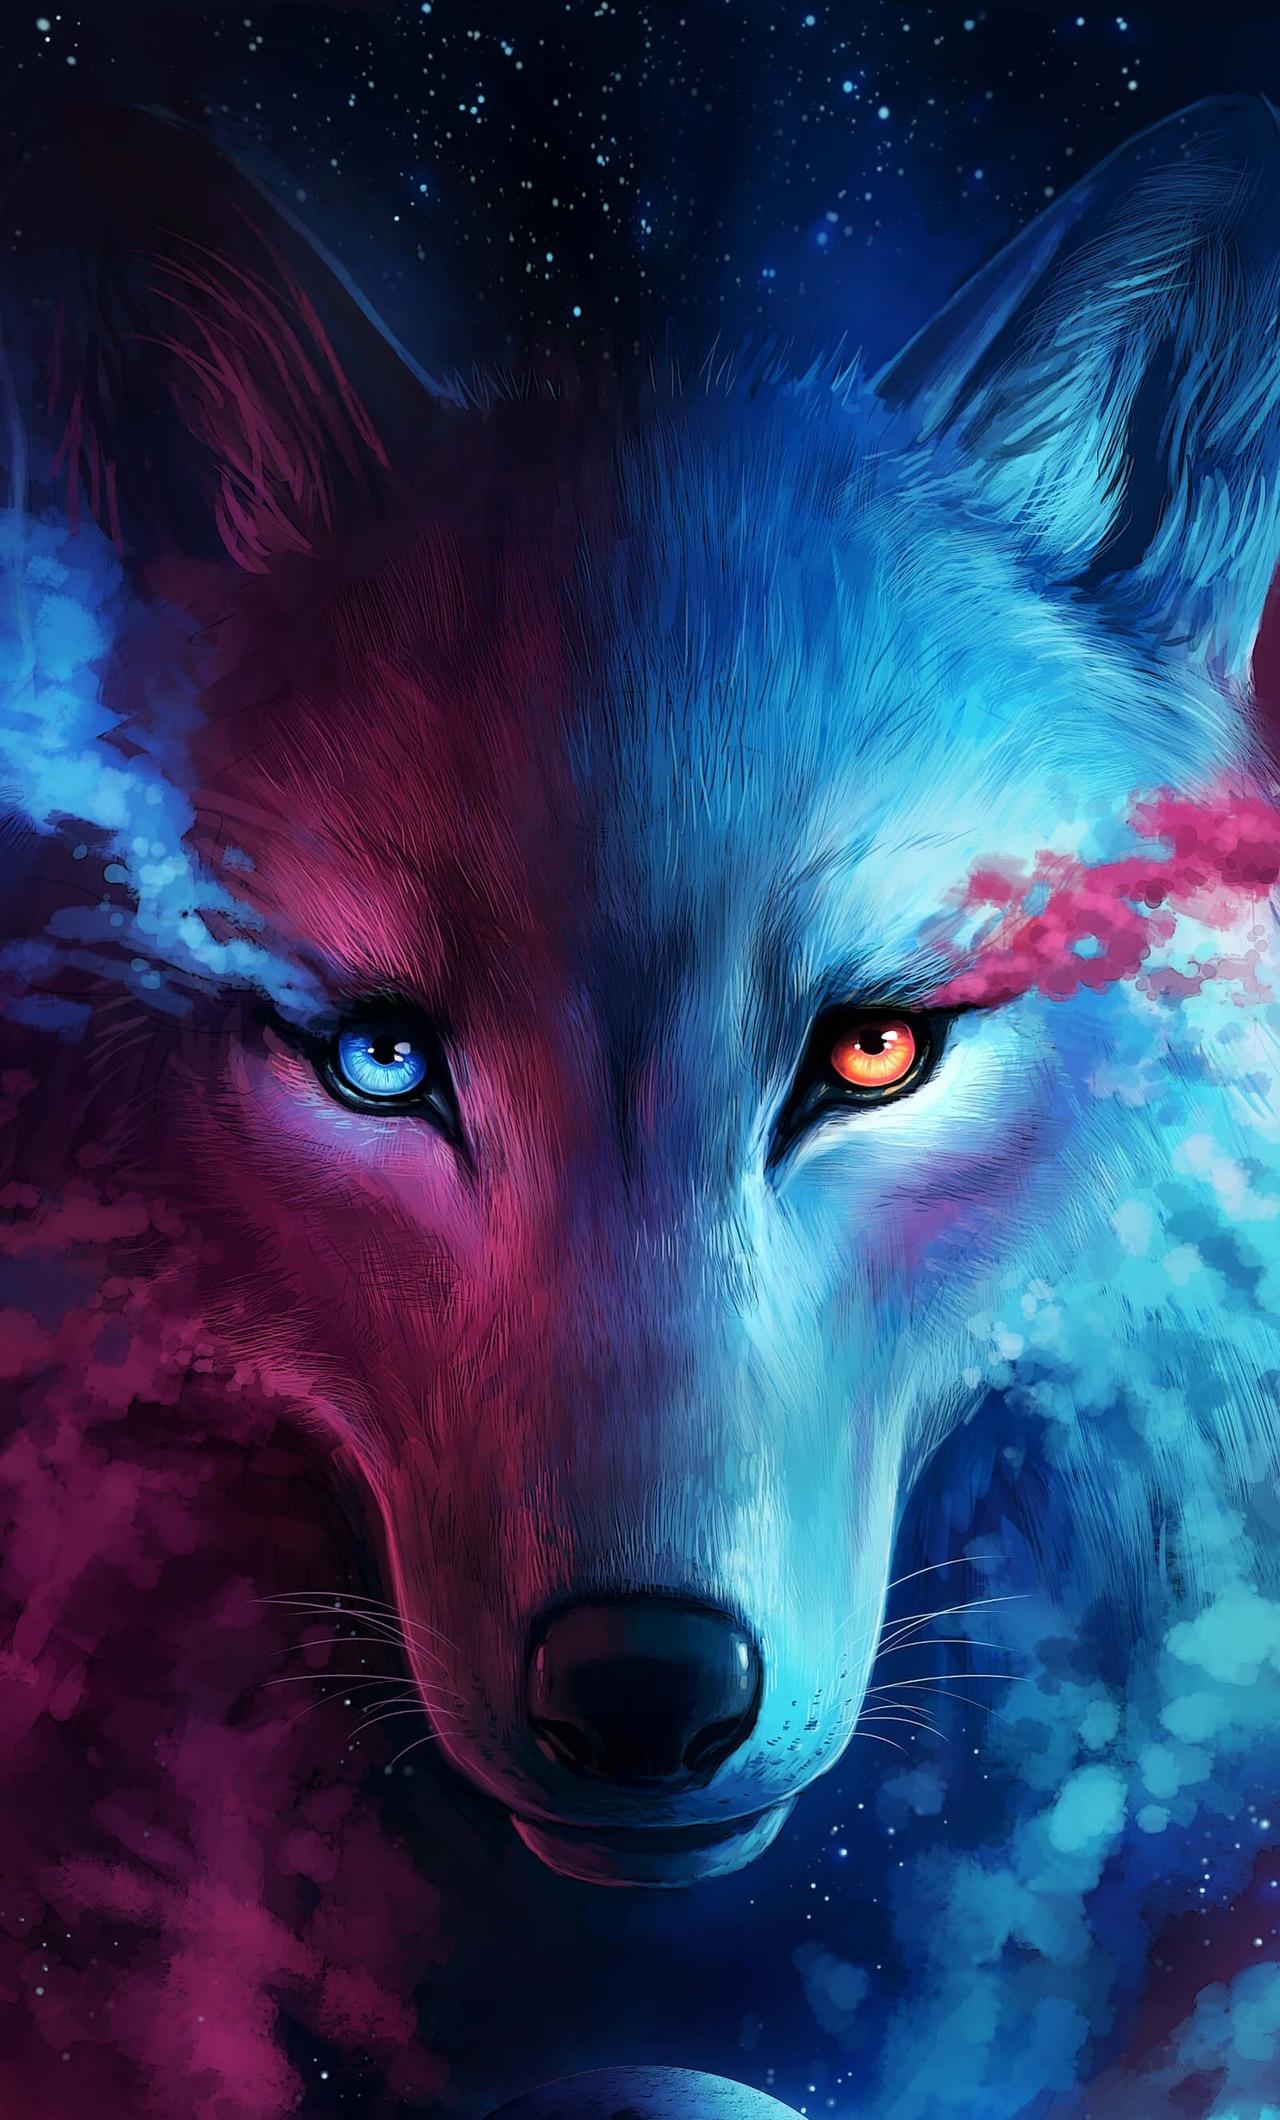 The Galaxy Wolf iPhone HD 4k Wallpaper, Image